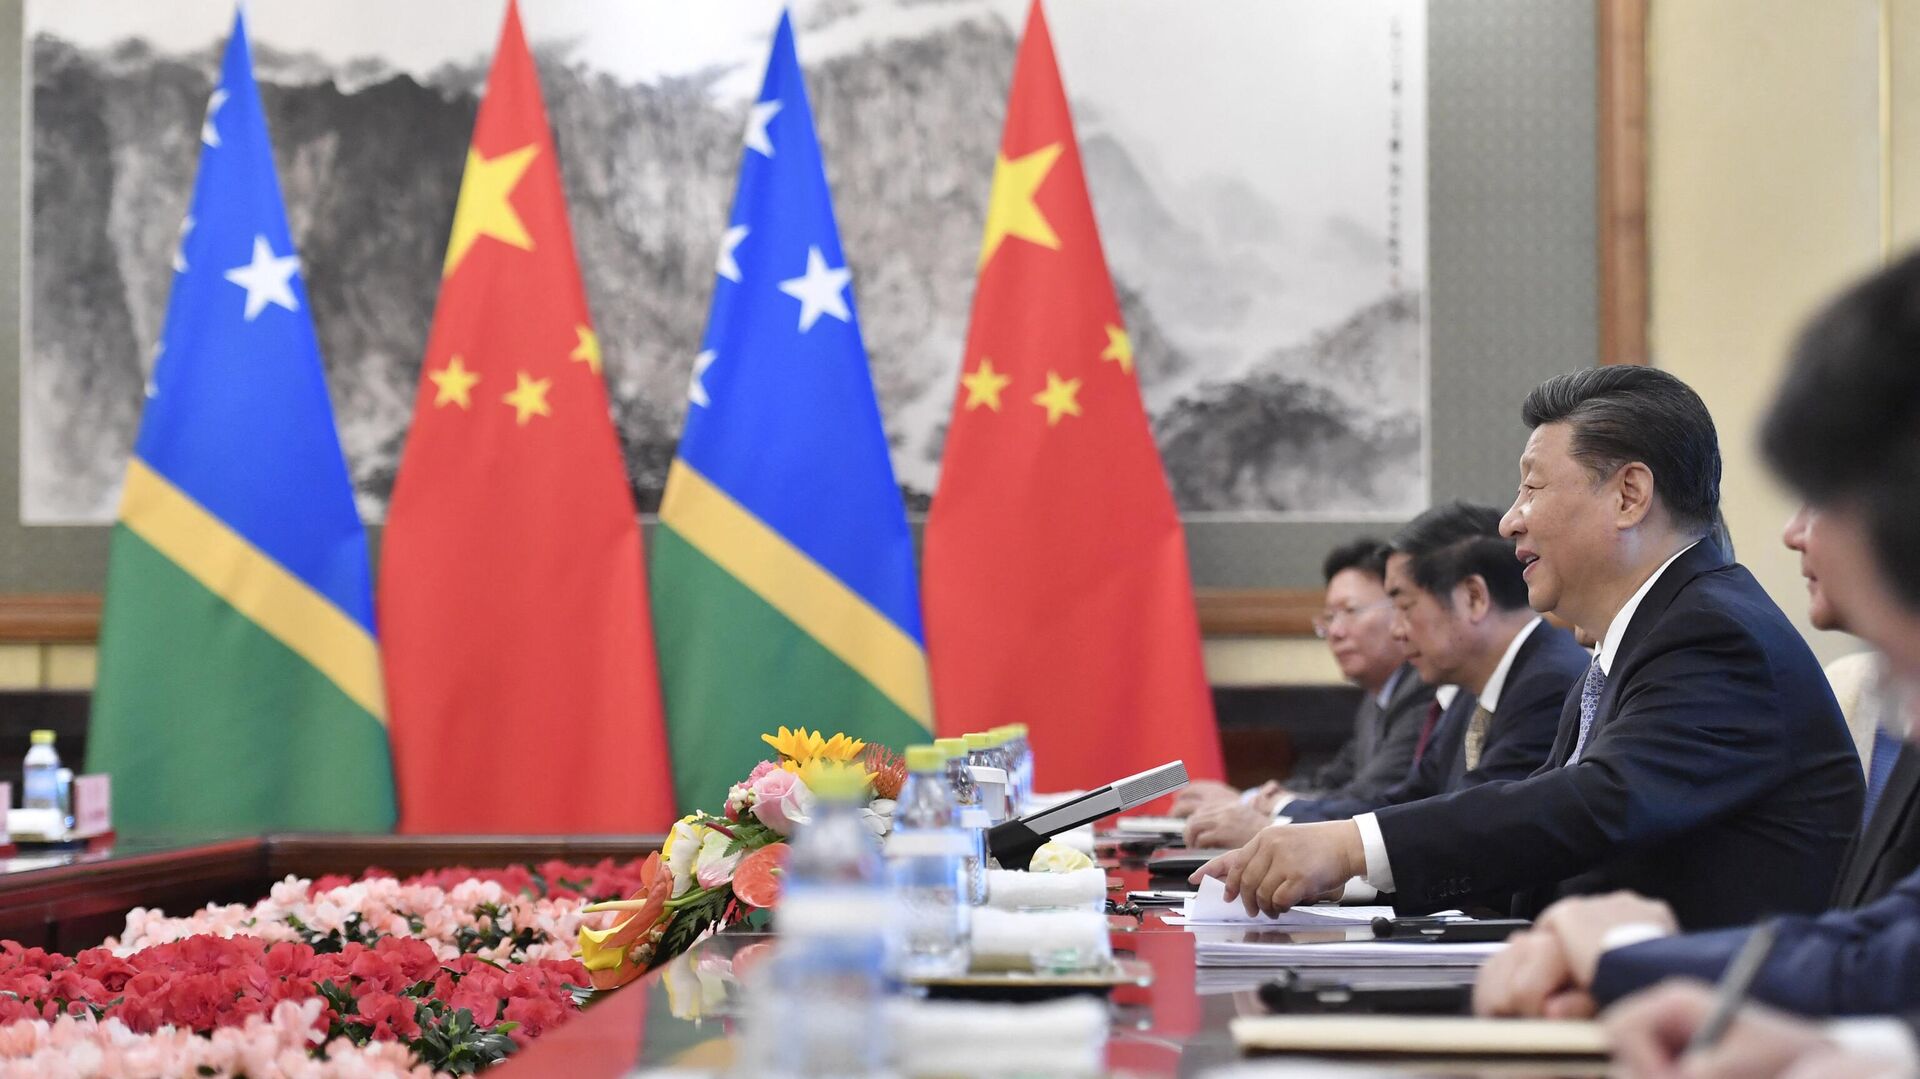 Chinese President Xi Jinping talks to Solomon Islands Prime Minister Manasseh Sogavare (not pictured) during their meeting at the Diaoyutai State Guesthouse in Beijing on October 9, 2019. (Photo by Parker Song / POOL / AFP) - Sputnik International, 1920, 25.03.2022